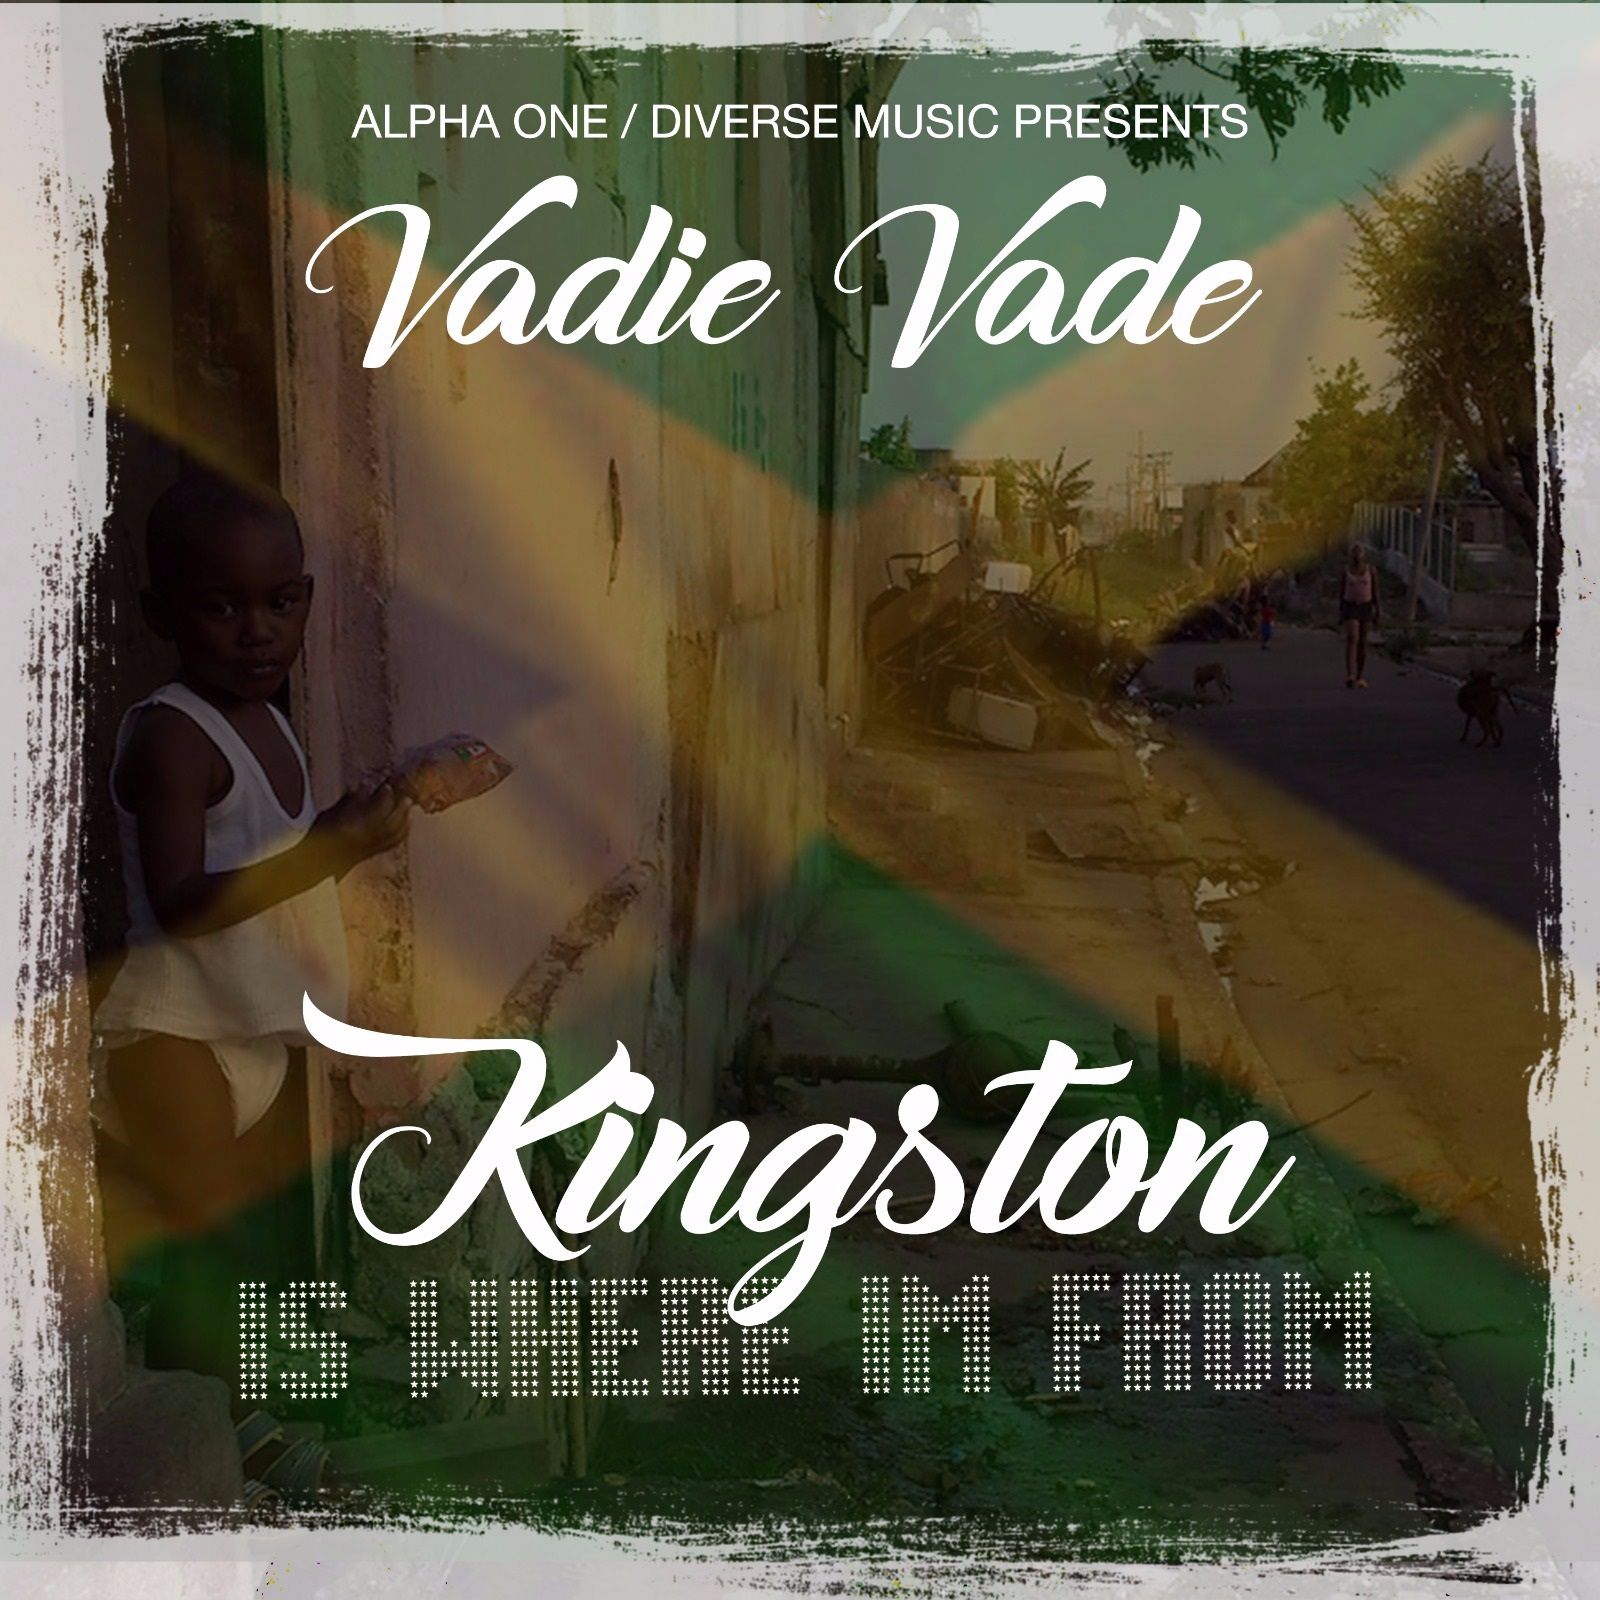 A1DM PROMO VADIE VADE KINGSTON IS WHERE IM FROM